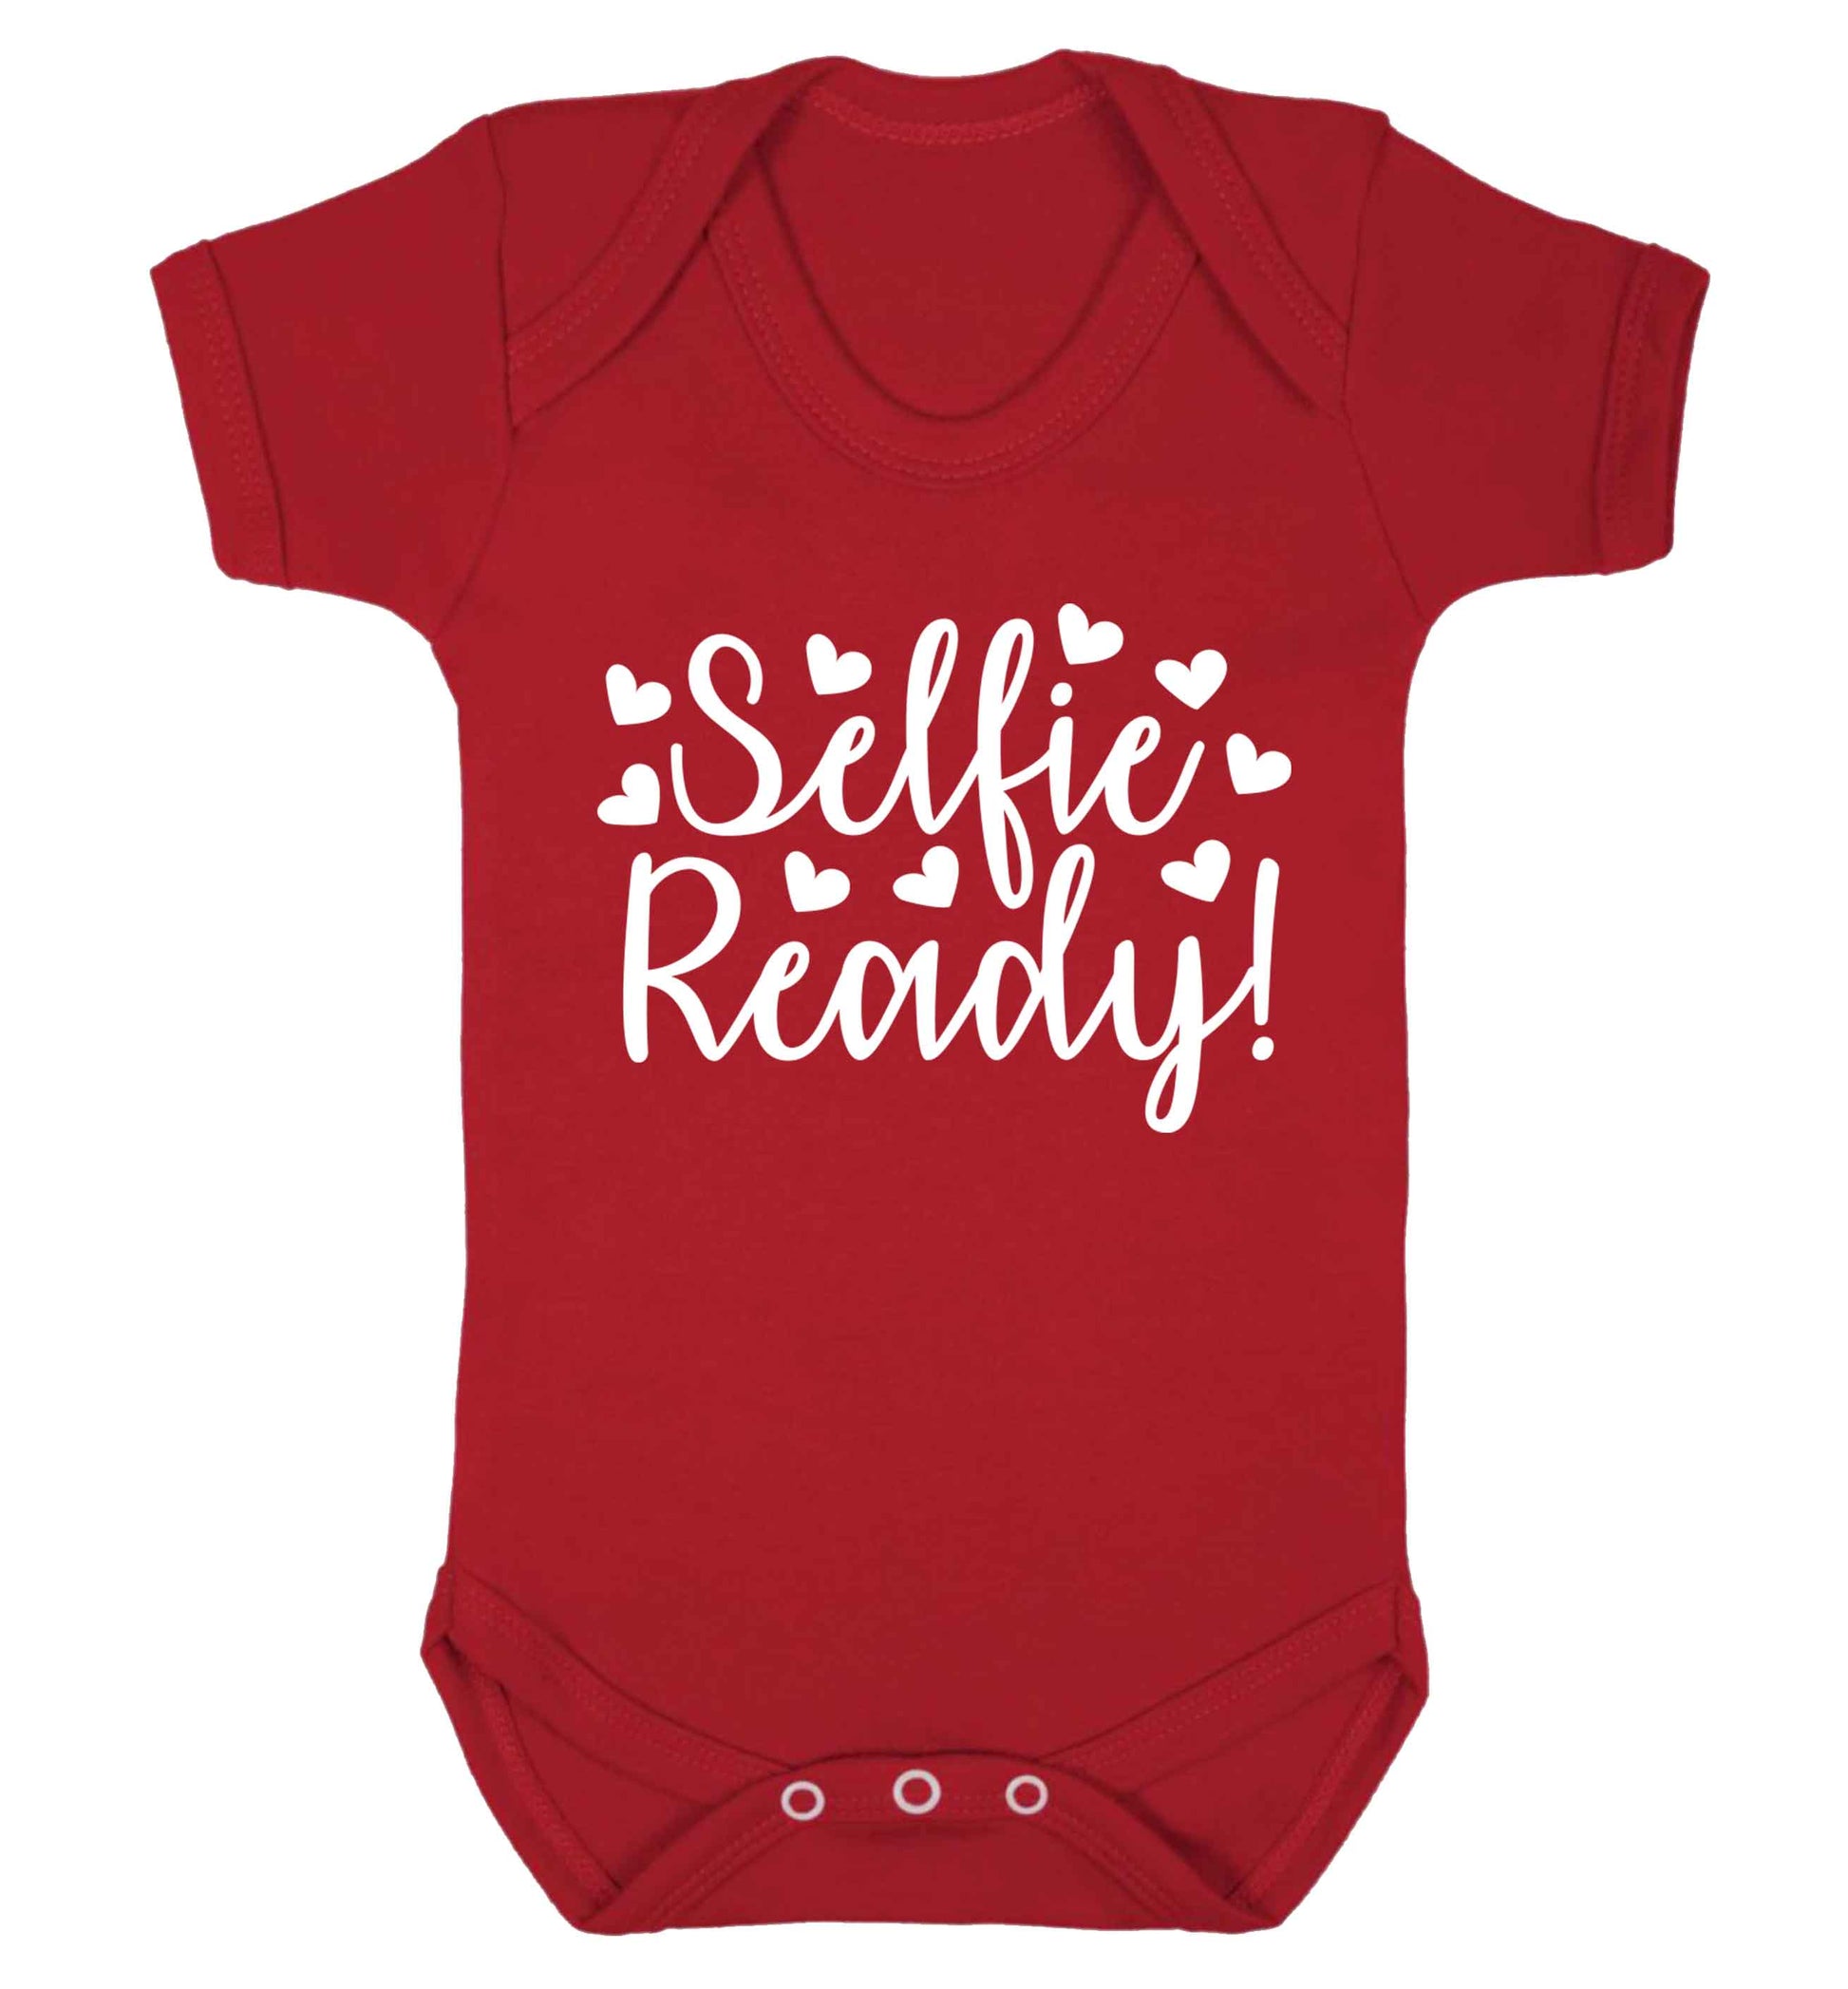 Selfie ready Baby Vest red 18-24 months